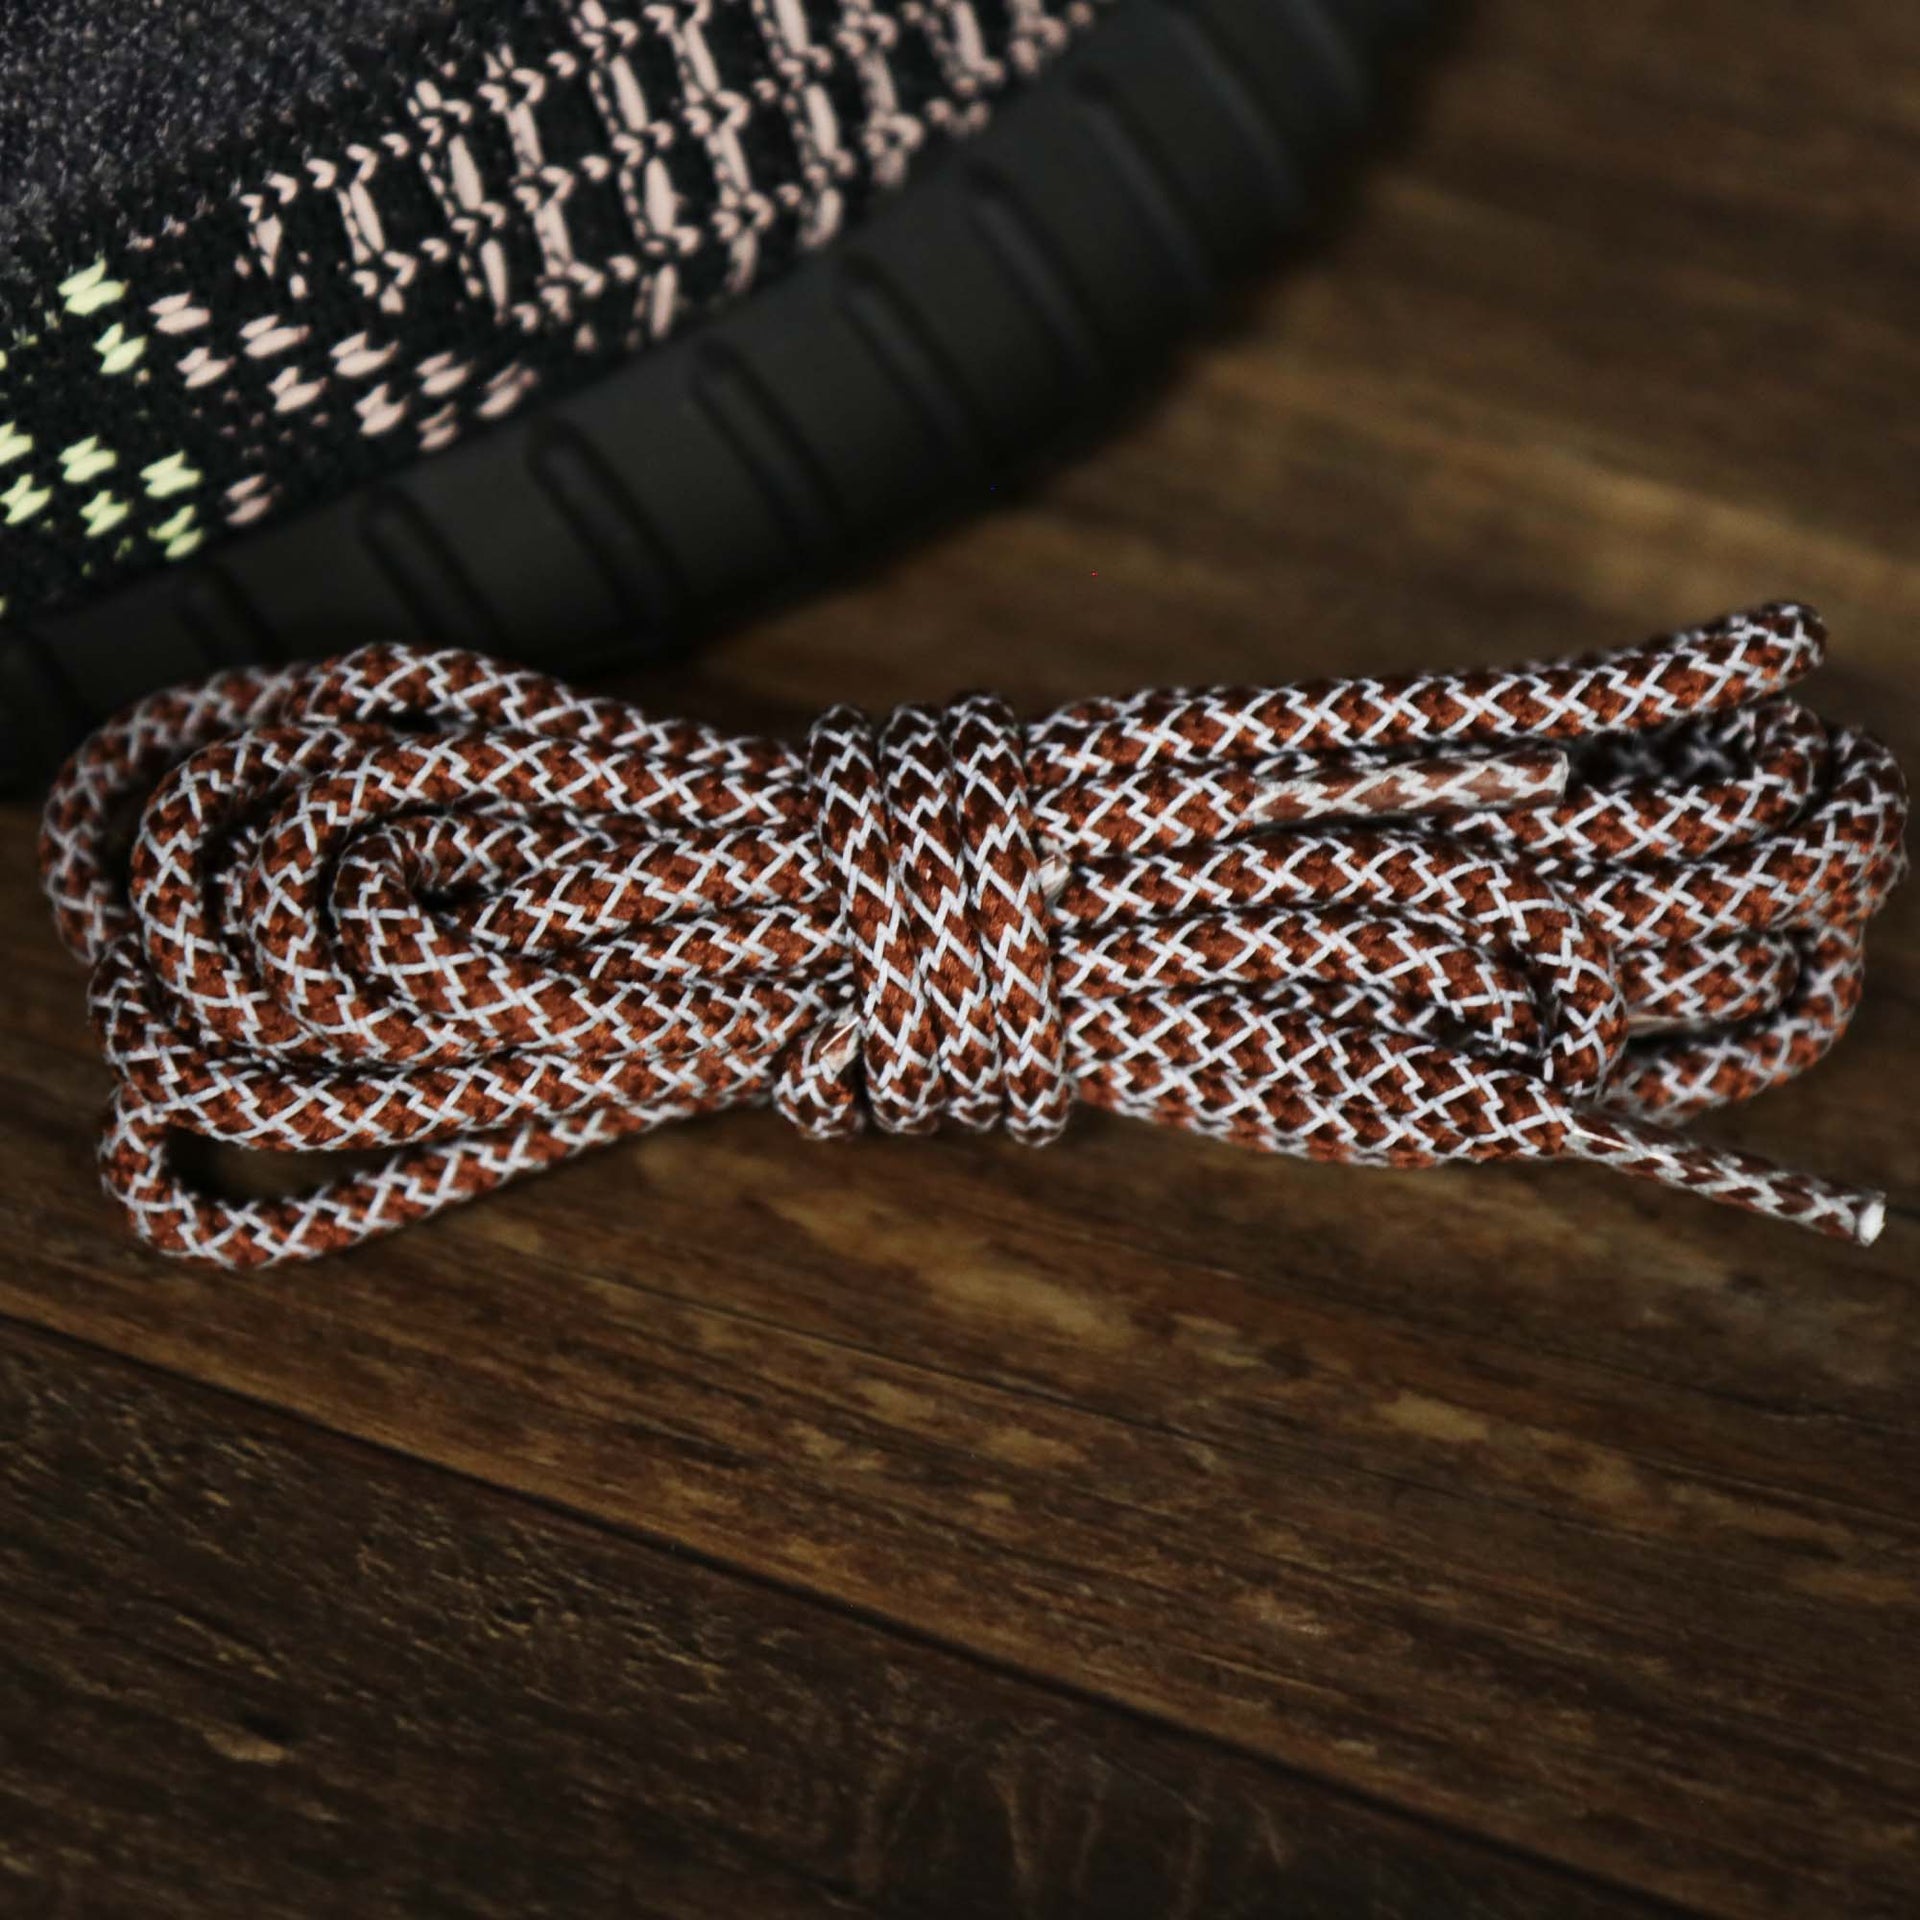 The 3M Reflective Brown Solid Shoelaces with Brown Aglets | 120cm Capswag folded up and refelctive